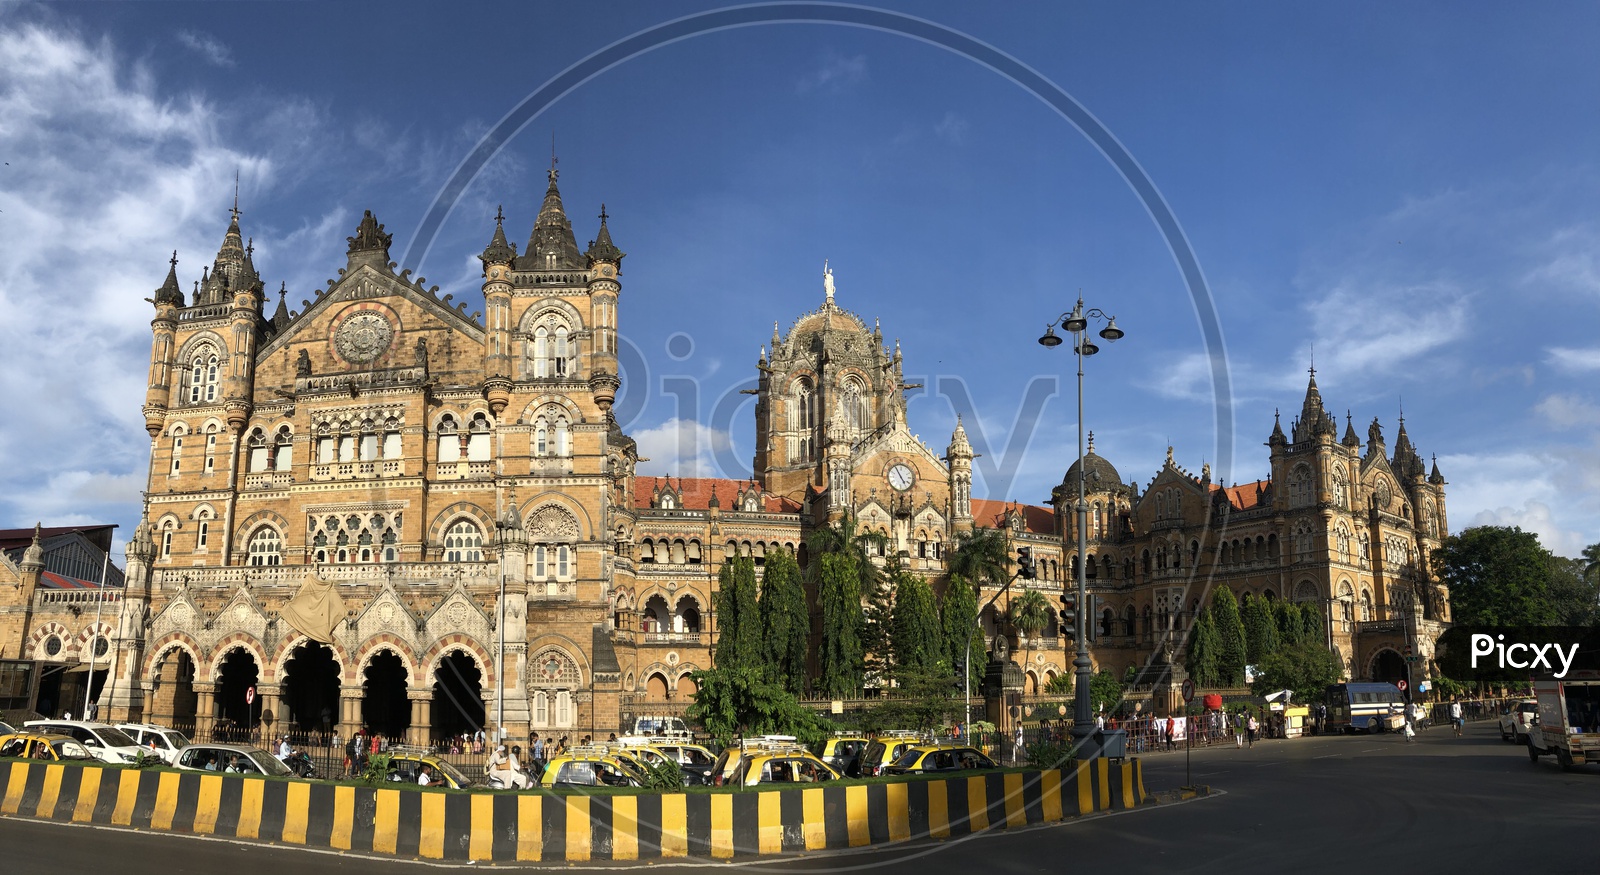 Mumbai Central Railway Station CSMT Building   View From Outside